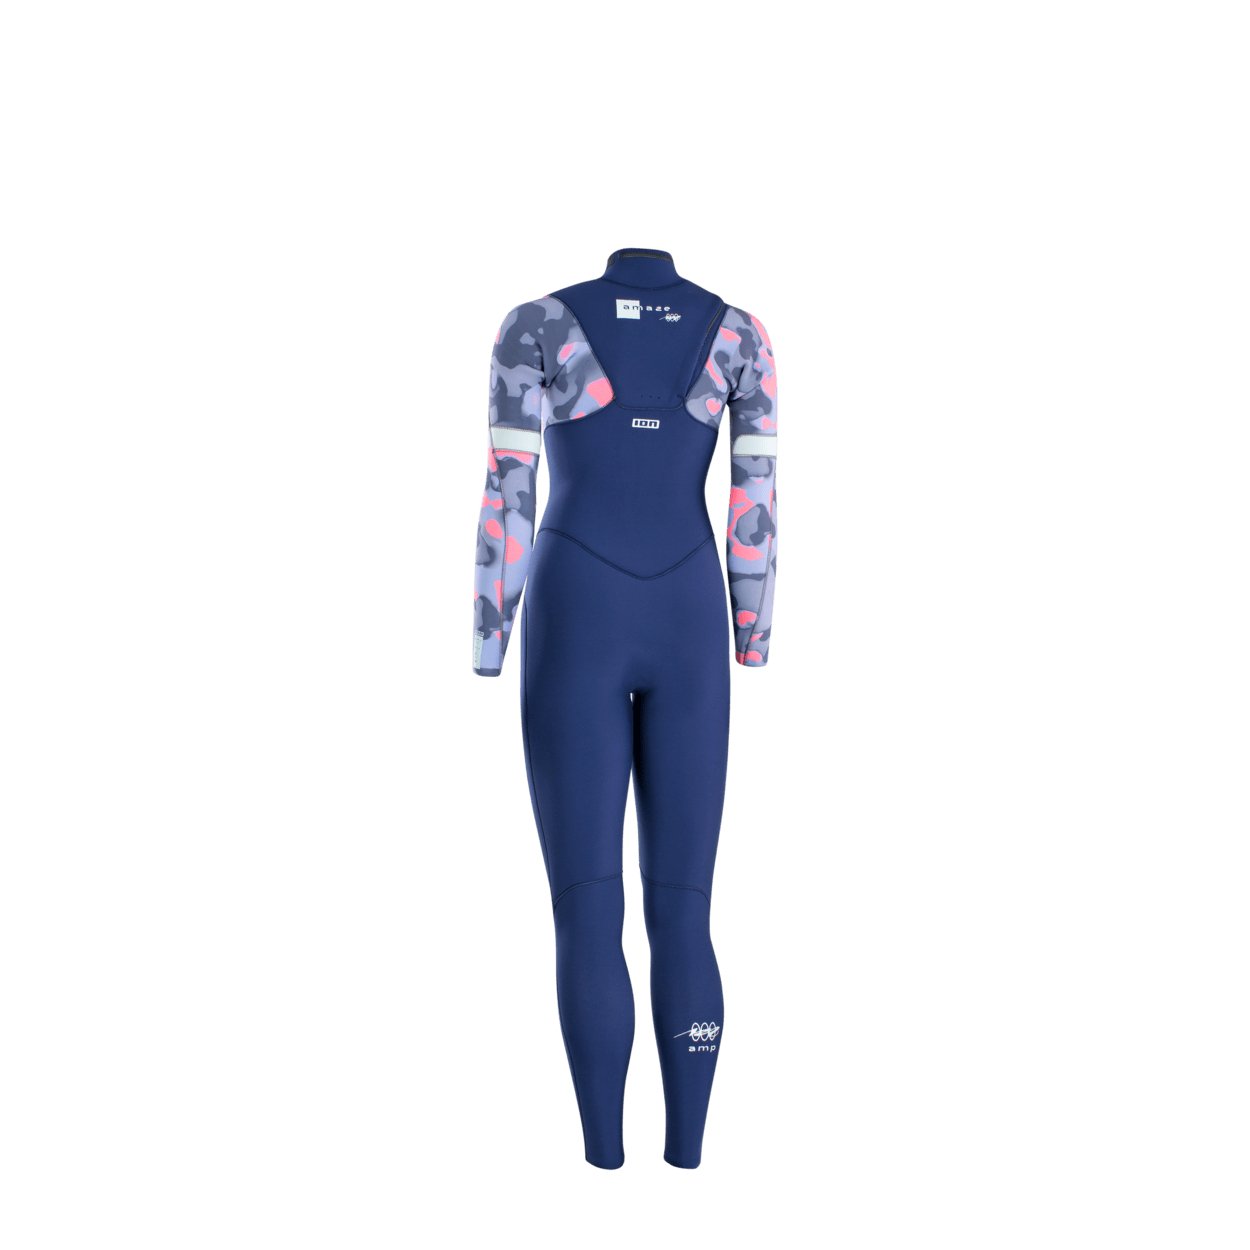 ION Women Wetsuit Amaze Amp 4/3 Front Zip 2023 - Worthing Watersports - 9010583057866 - Wetsuits - ION Water